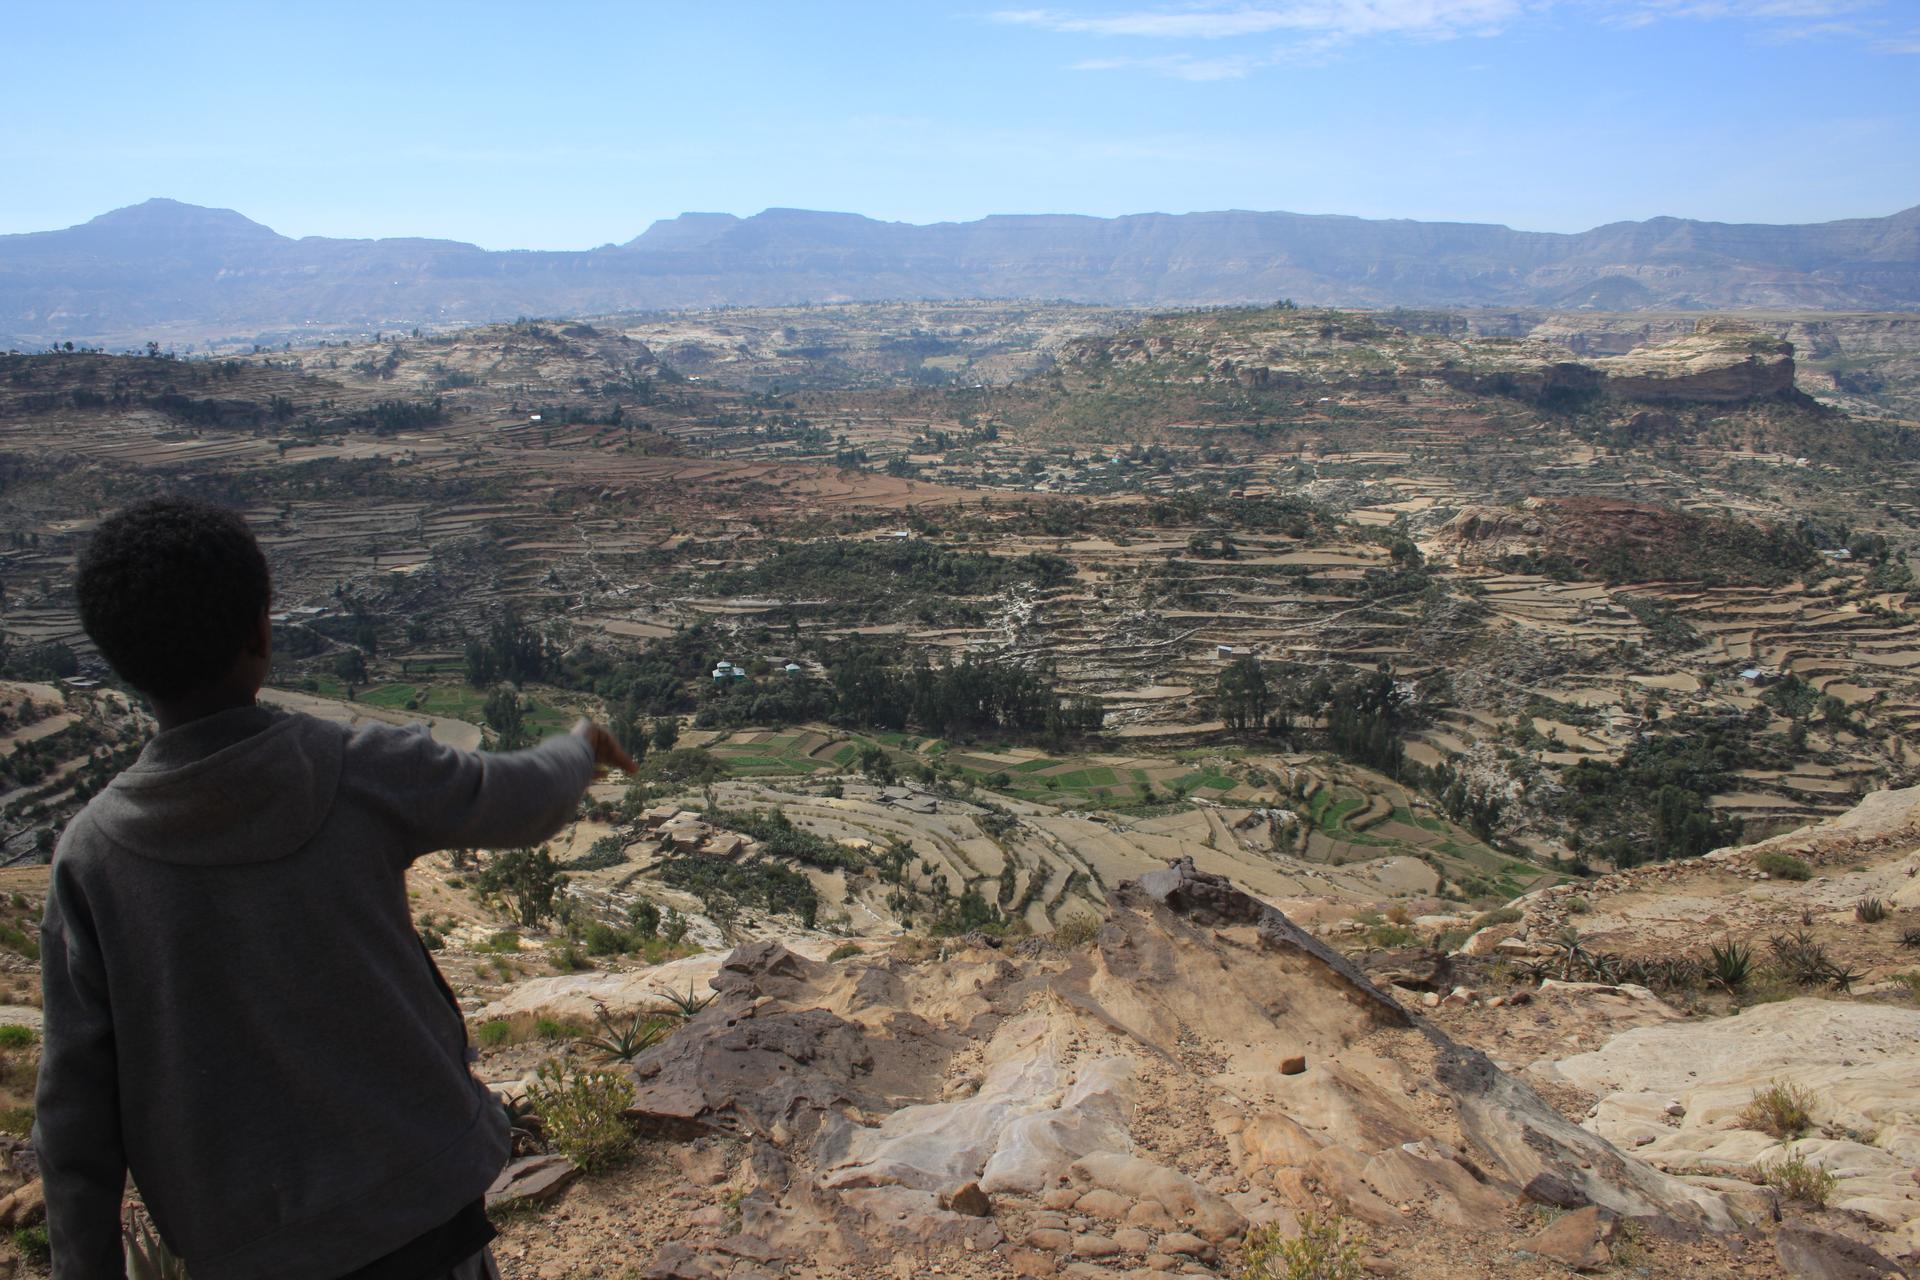 The rugged landscape of Tigray, Ethiopia’s most northern region, stretches away to the north and into Eritrea. Once Eritrea was Ethiopia’s most northern region until it gained independence in 1991.